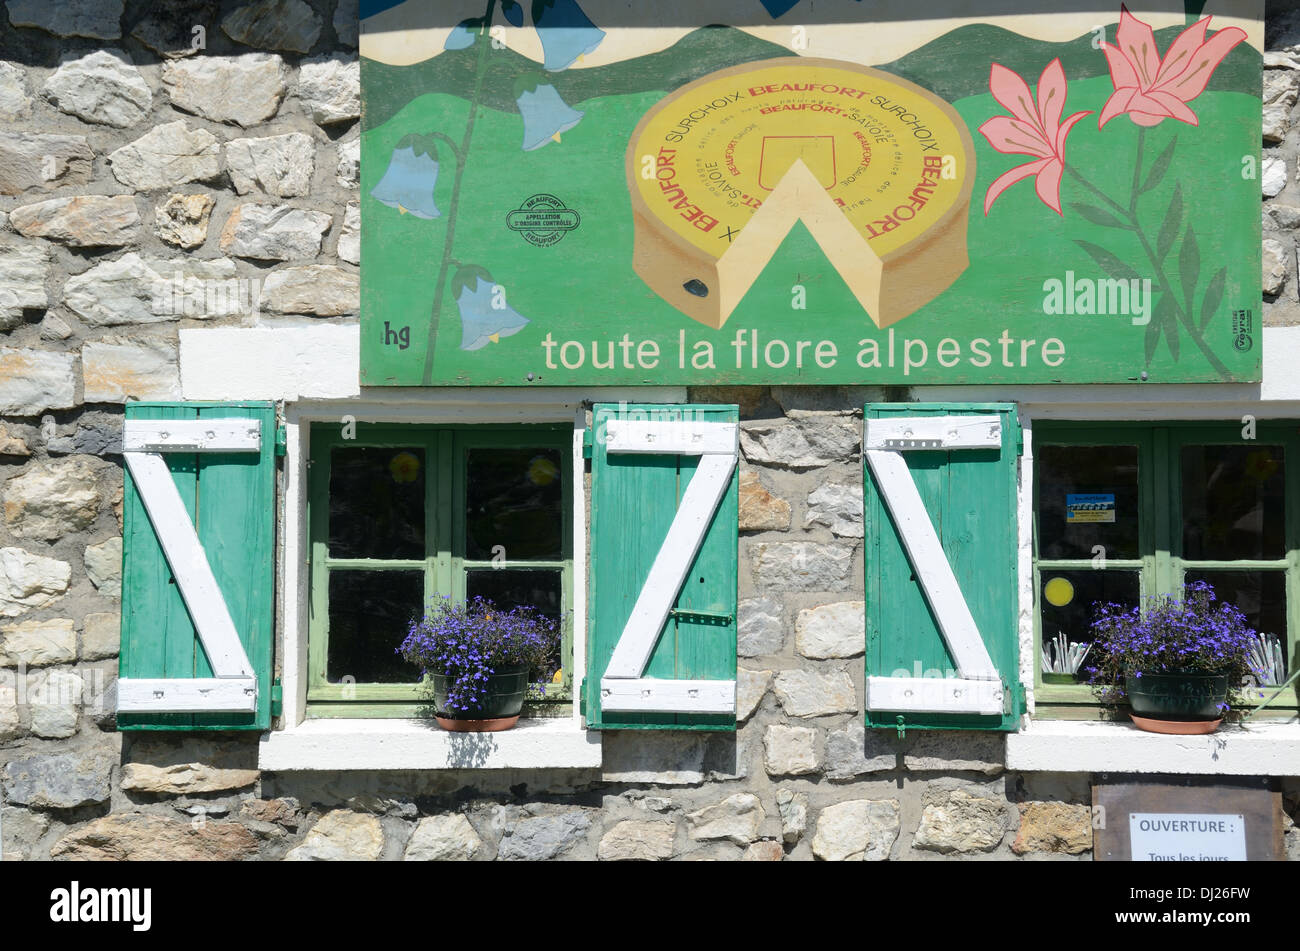 Beaufort Cheese Advert & Green Painted Shutters on Alpine Chalet Col du Galibier French Alps France Stock Photo